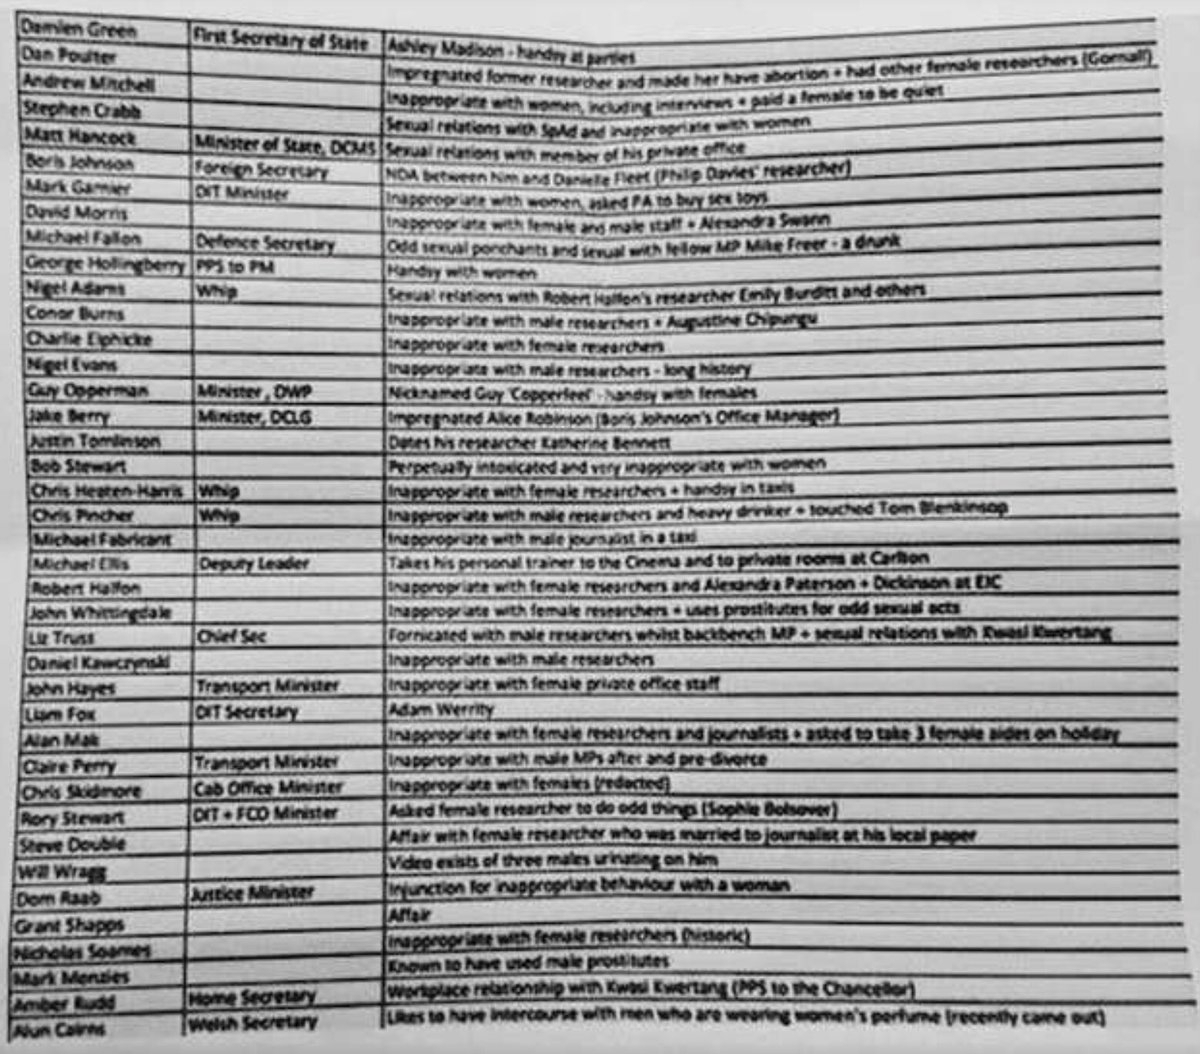 Tory Spreadsheet Pertaining To Tom Pride On Twitter: "the Unredacted Spreadsheet Of 40 Tory Mps